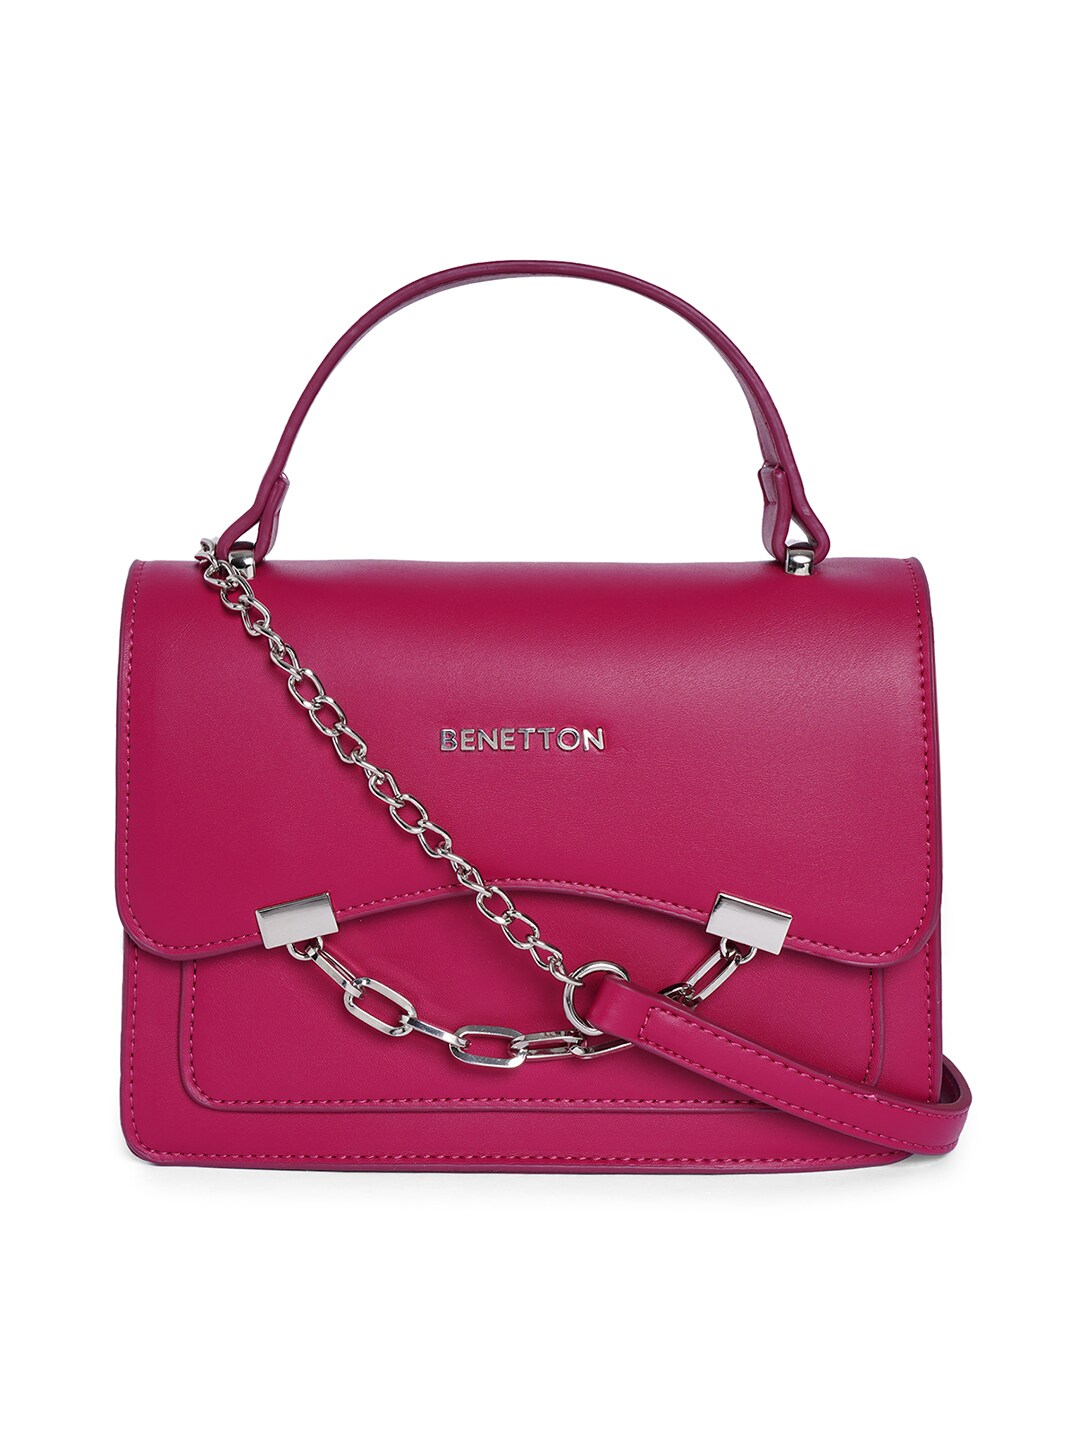 United Colors of Benetton Pink Solid Satchel Price in India